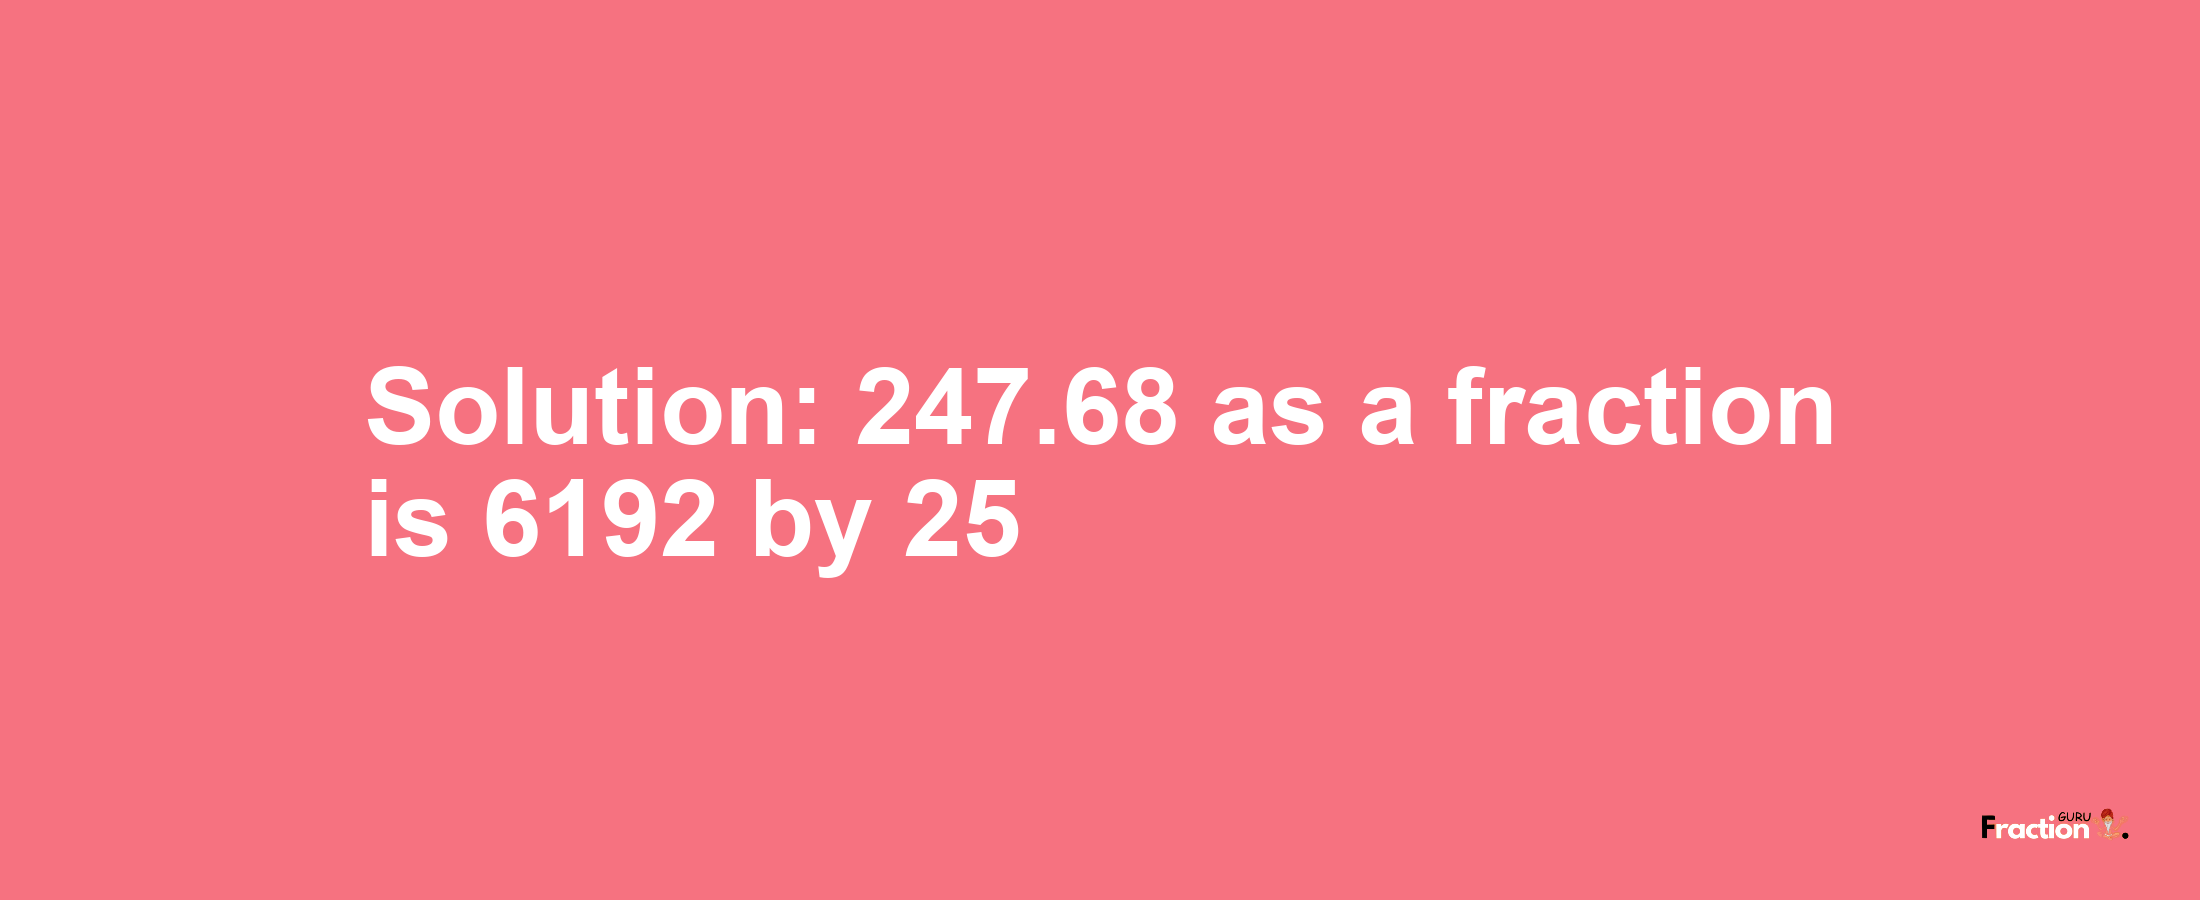 Solution:247.68 as a fraction is 6192/25